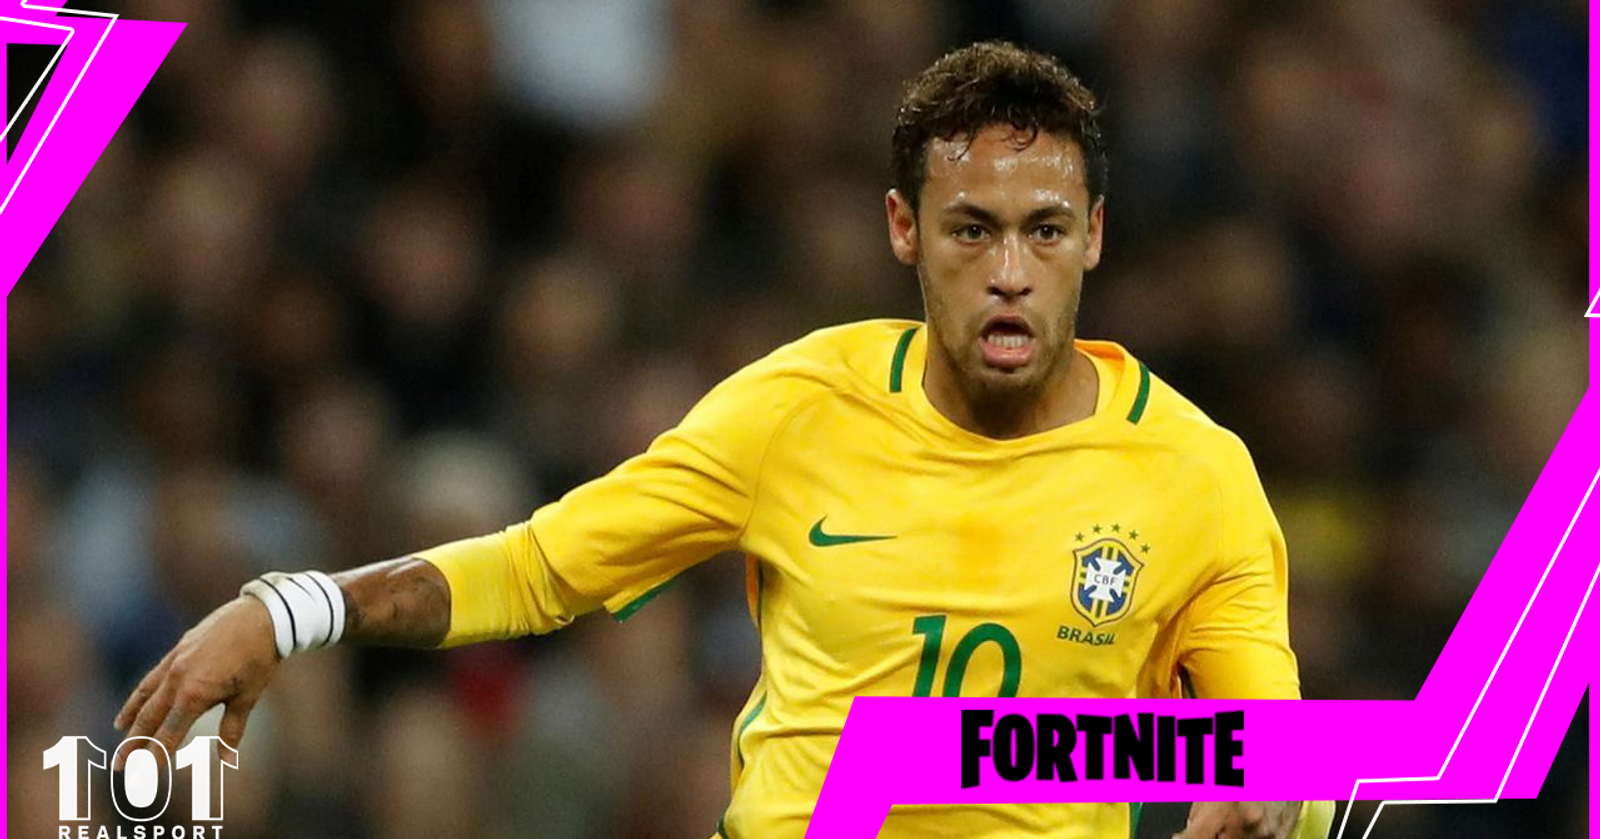 Neymar Jr is the first football player with skin in Fortnite